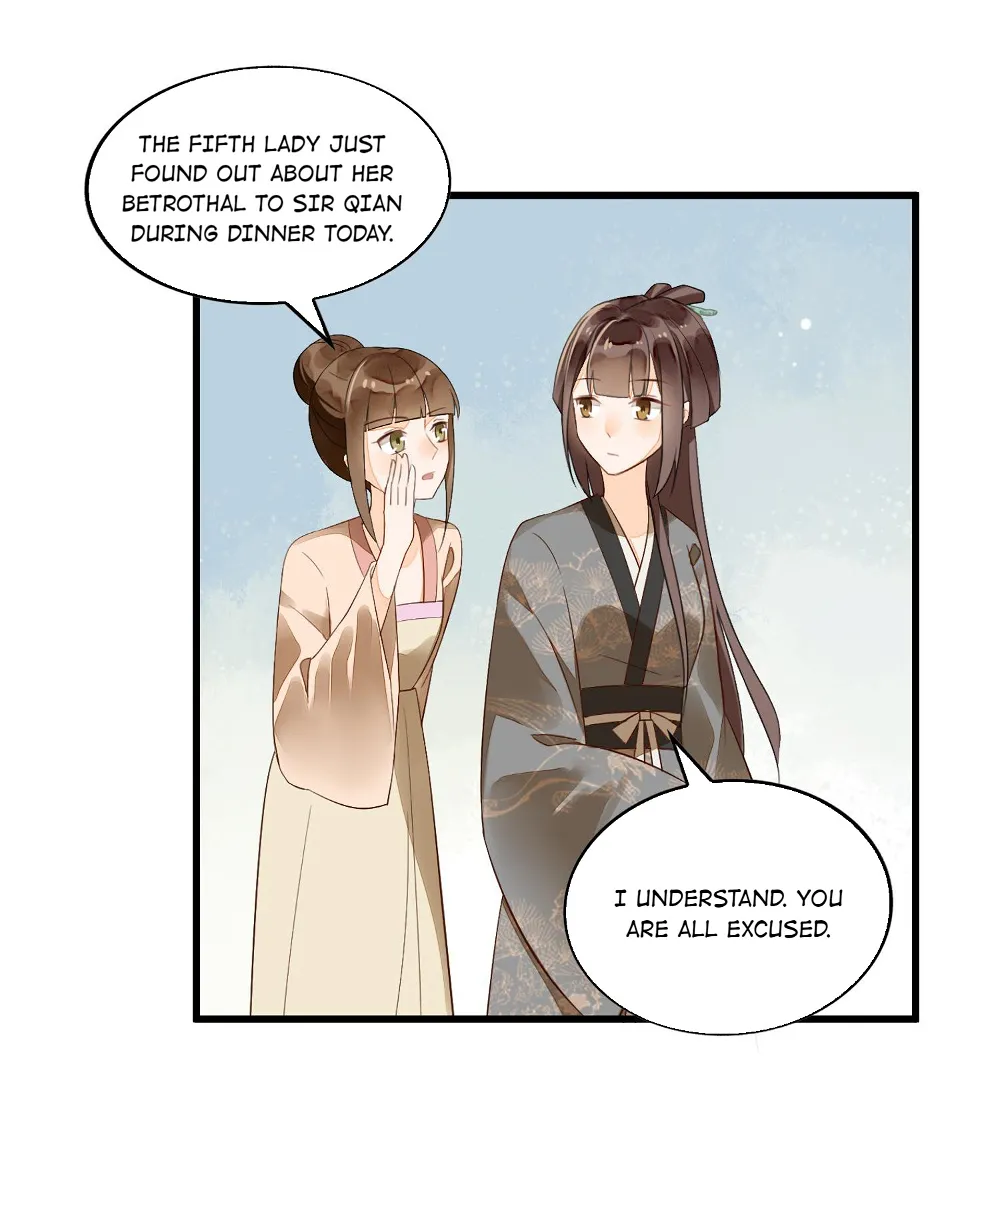 A Concubine’s Daughter and Her Tactics chapter 17